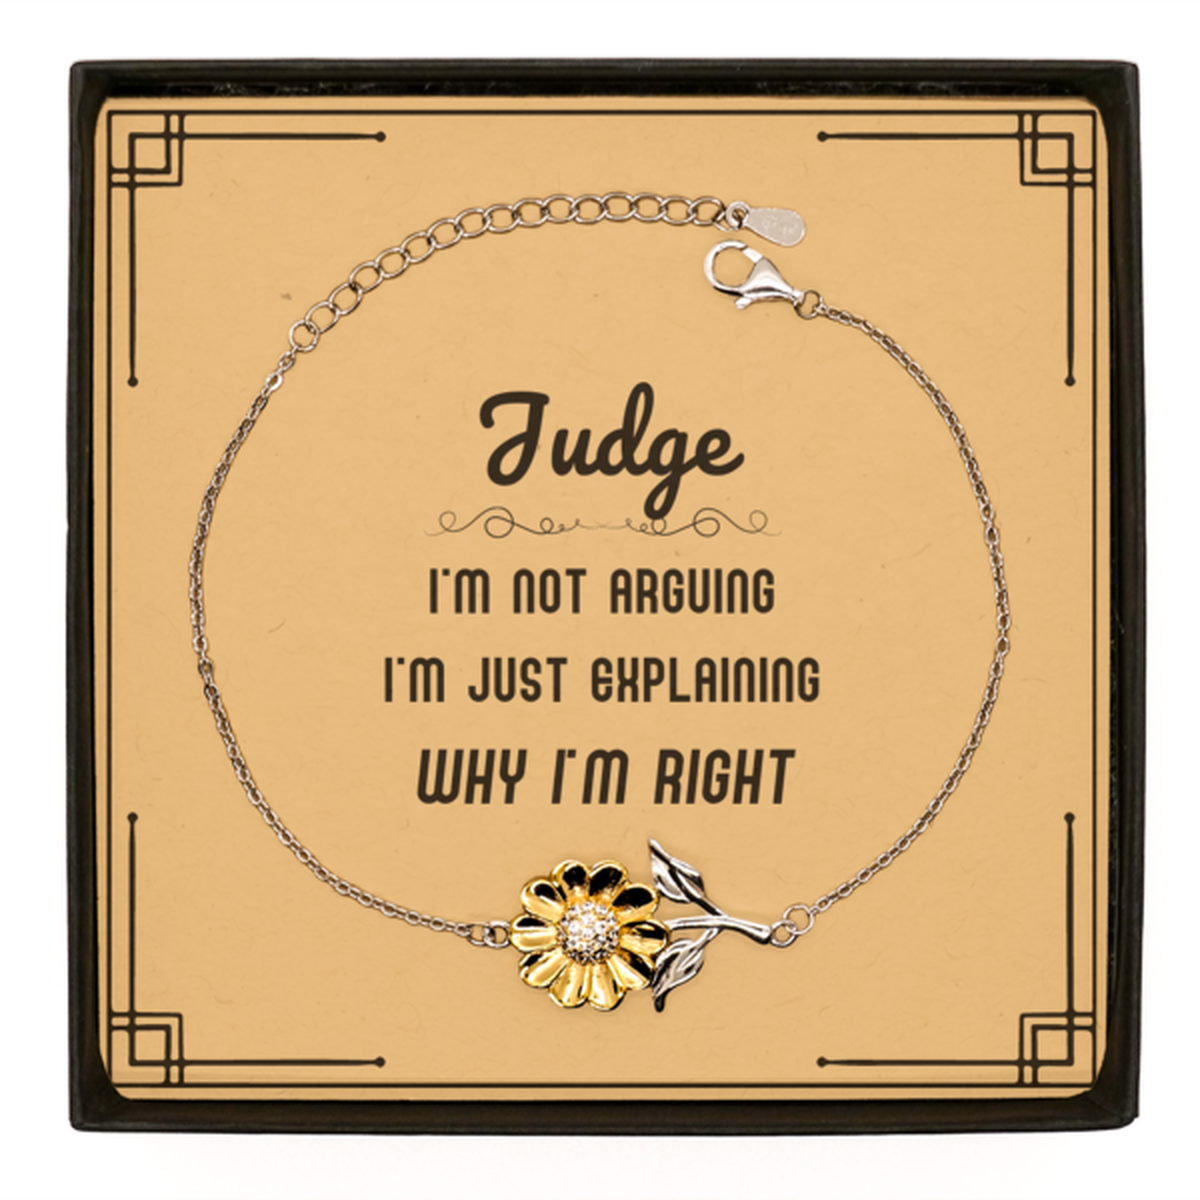 Judge I'm not Arguing. I'm Just Explaining Why I'm RIGHT Sunflower Bracelet, Funny Saying Quote Judge Gifts For Judge Message Card Graduation Birthday Christmas Gifts for Men Women Coworker